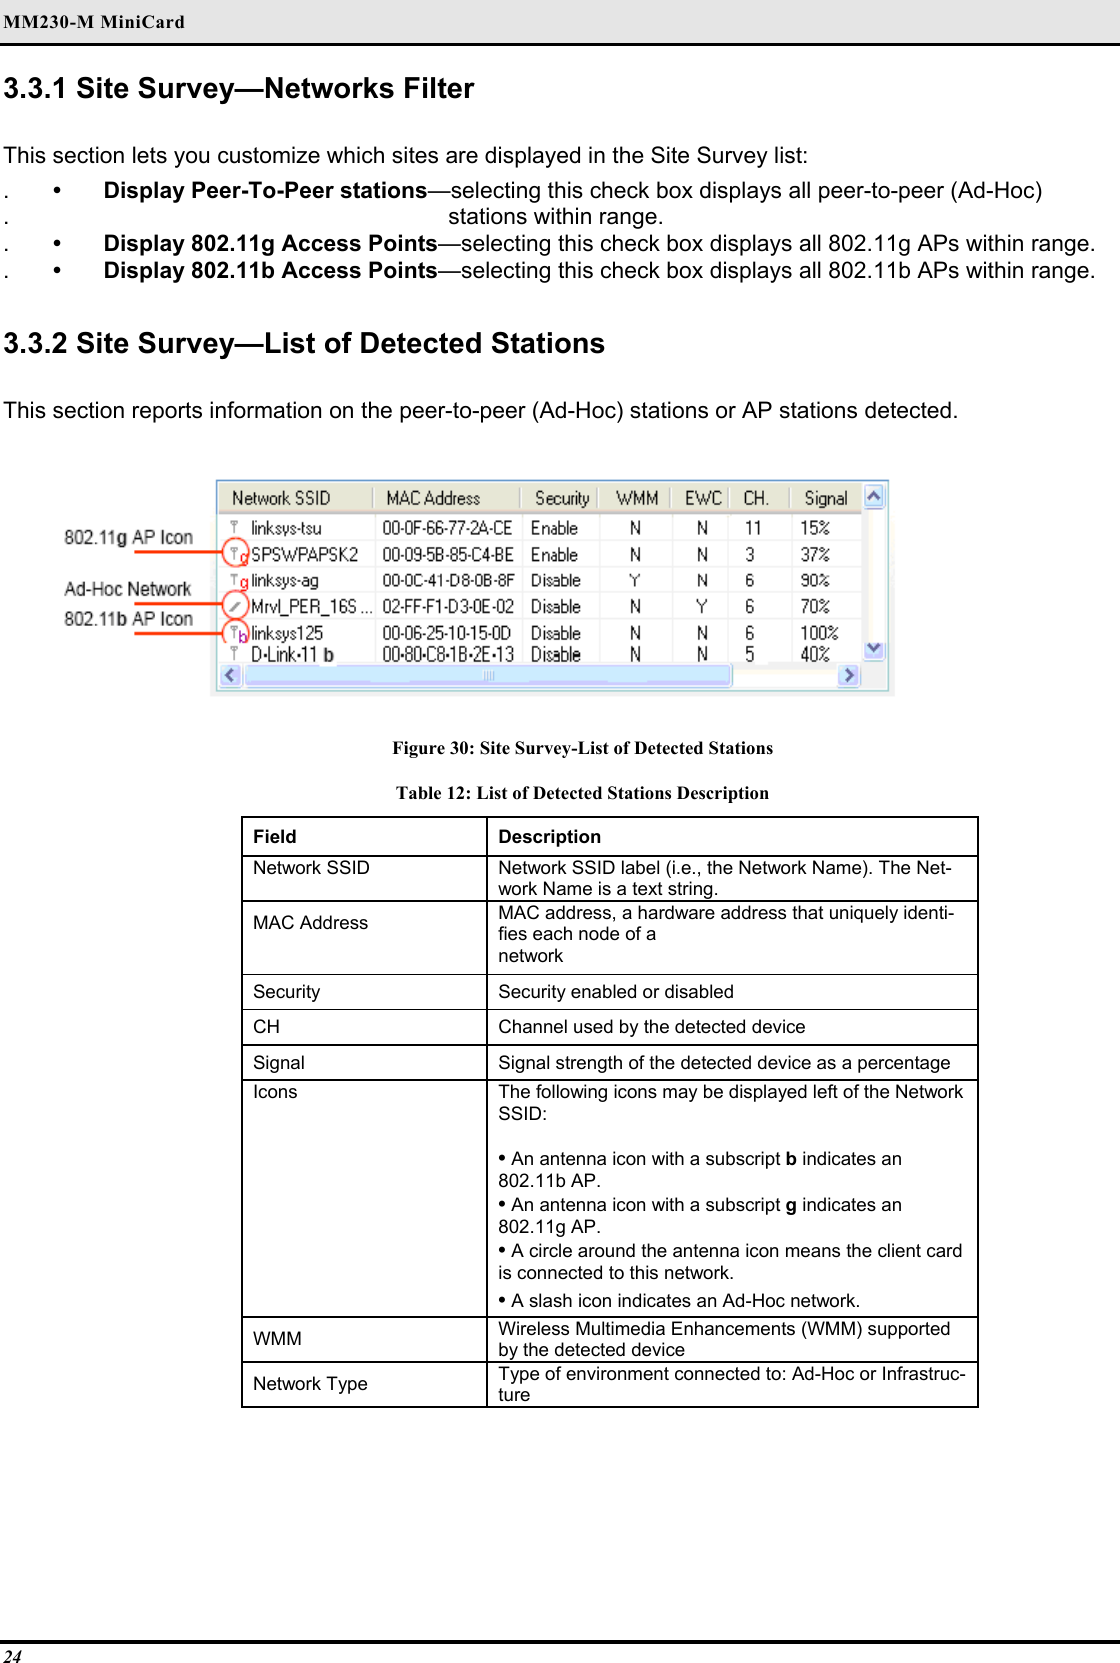 MM230-M MiniCard 24 3.3.1 Site Survey—Networks Filter   This section lets you customize which sites are displayed in the Site Survey list:  .  •  Display Peer-To-Peer stations—selecting this check box displays all peer-to-peer (Ad-Hoc)   .                                                                stations within range.  .  •  Display 802.11g Access Points—selecting this check box displays all 802.11g APs within range.  .  •  Display 802.11b Access Points—selecting this check box displays all 802.11b APs within range.   3.3.2 Site Survey—List of Detected Stations   This section reports information on the peer-to-peer (Ad-Hoc) stations or AP stations detected.   Figure 30: Site Survey-List of Detected Stations Table 12: List of Detected Stations Description Field  Description  Network SSID   Network SSID label (i.e., the Network Name). The Net-work Name is a text string.  MAC Address   MAC address, a hardware address that uniquely identi-fies each node of a   network  Security   Security enabled or disabled  CH   Channel used by the detected device  Signal   Signal strength of the detected device as a percentage  Icons   The following icons may be displayed left of the Network SSID:   • An antenna icon with a subscript b indicates an 802.11b AP.   • An antenna icon with a subscript g indicates an 802.11g AP.  • A circle around the antenna icon means the client card is connected to this network.  • A slash icon indicates an Ad-Hoc network.  WMM   Wireless Multimedia Enhancements (WMM) supported by the detected device  Network Type   Type of environment connected to: Ad-Hoc or Infrastruc-ture    